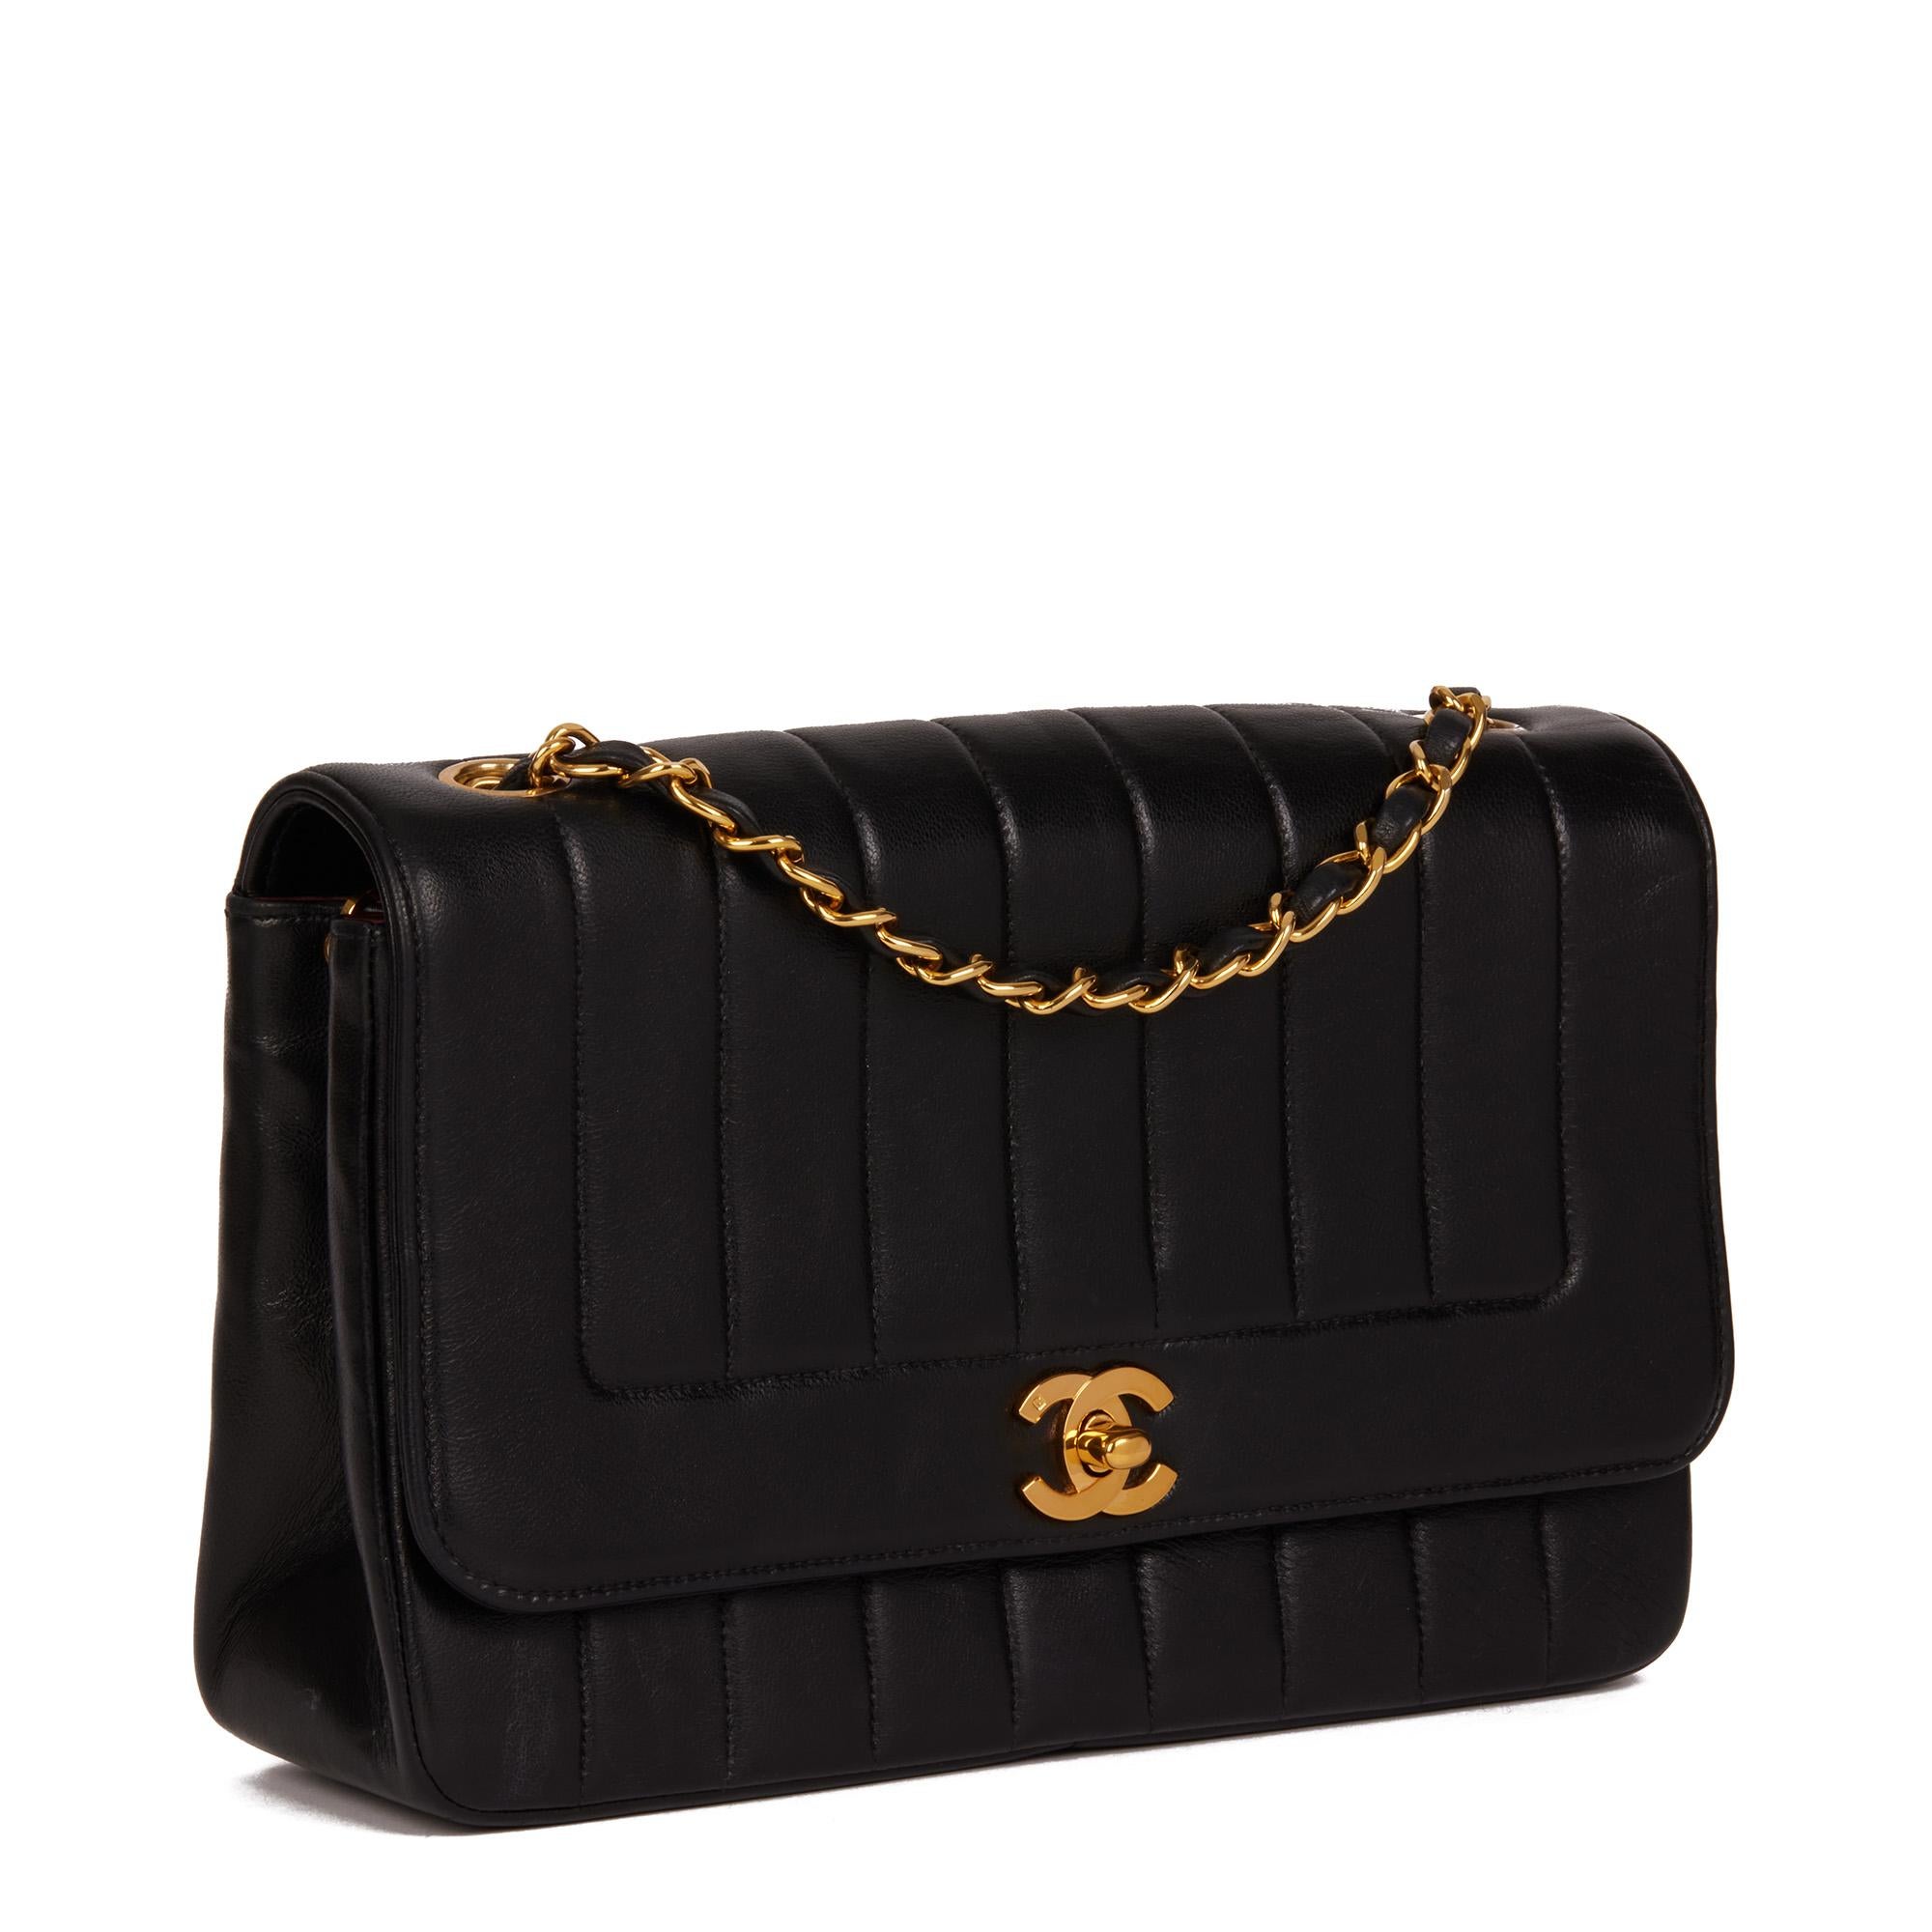 CHANEL
Black Vertical Quilted Lambskin Vintage Medium Classic Single Flap Bag

Serial Number: 2273038
Age (Circa): 1993
Accompanied By: Chanel Dust Bag, Authenticity Card
Authenticity Details: Authenticity Card, Serial Sticker (Made in France)